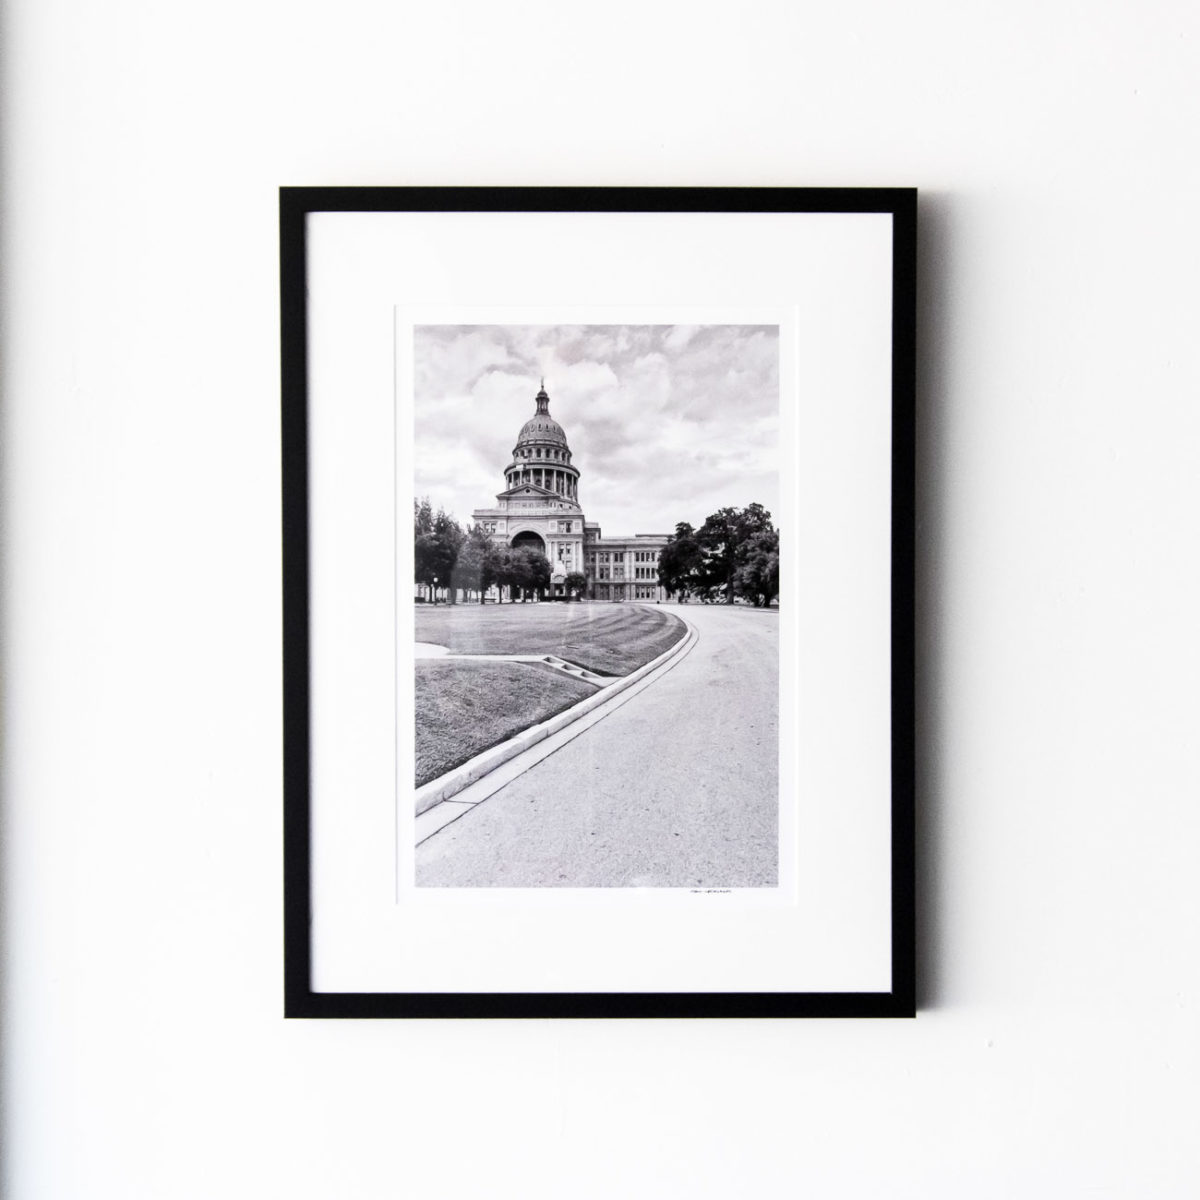 Texas State Capitol Building (south) - Framed 18x24